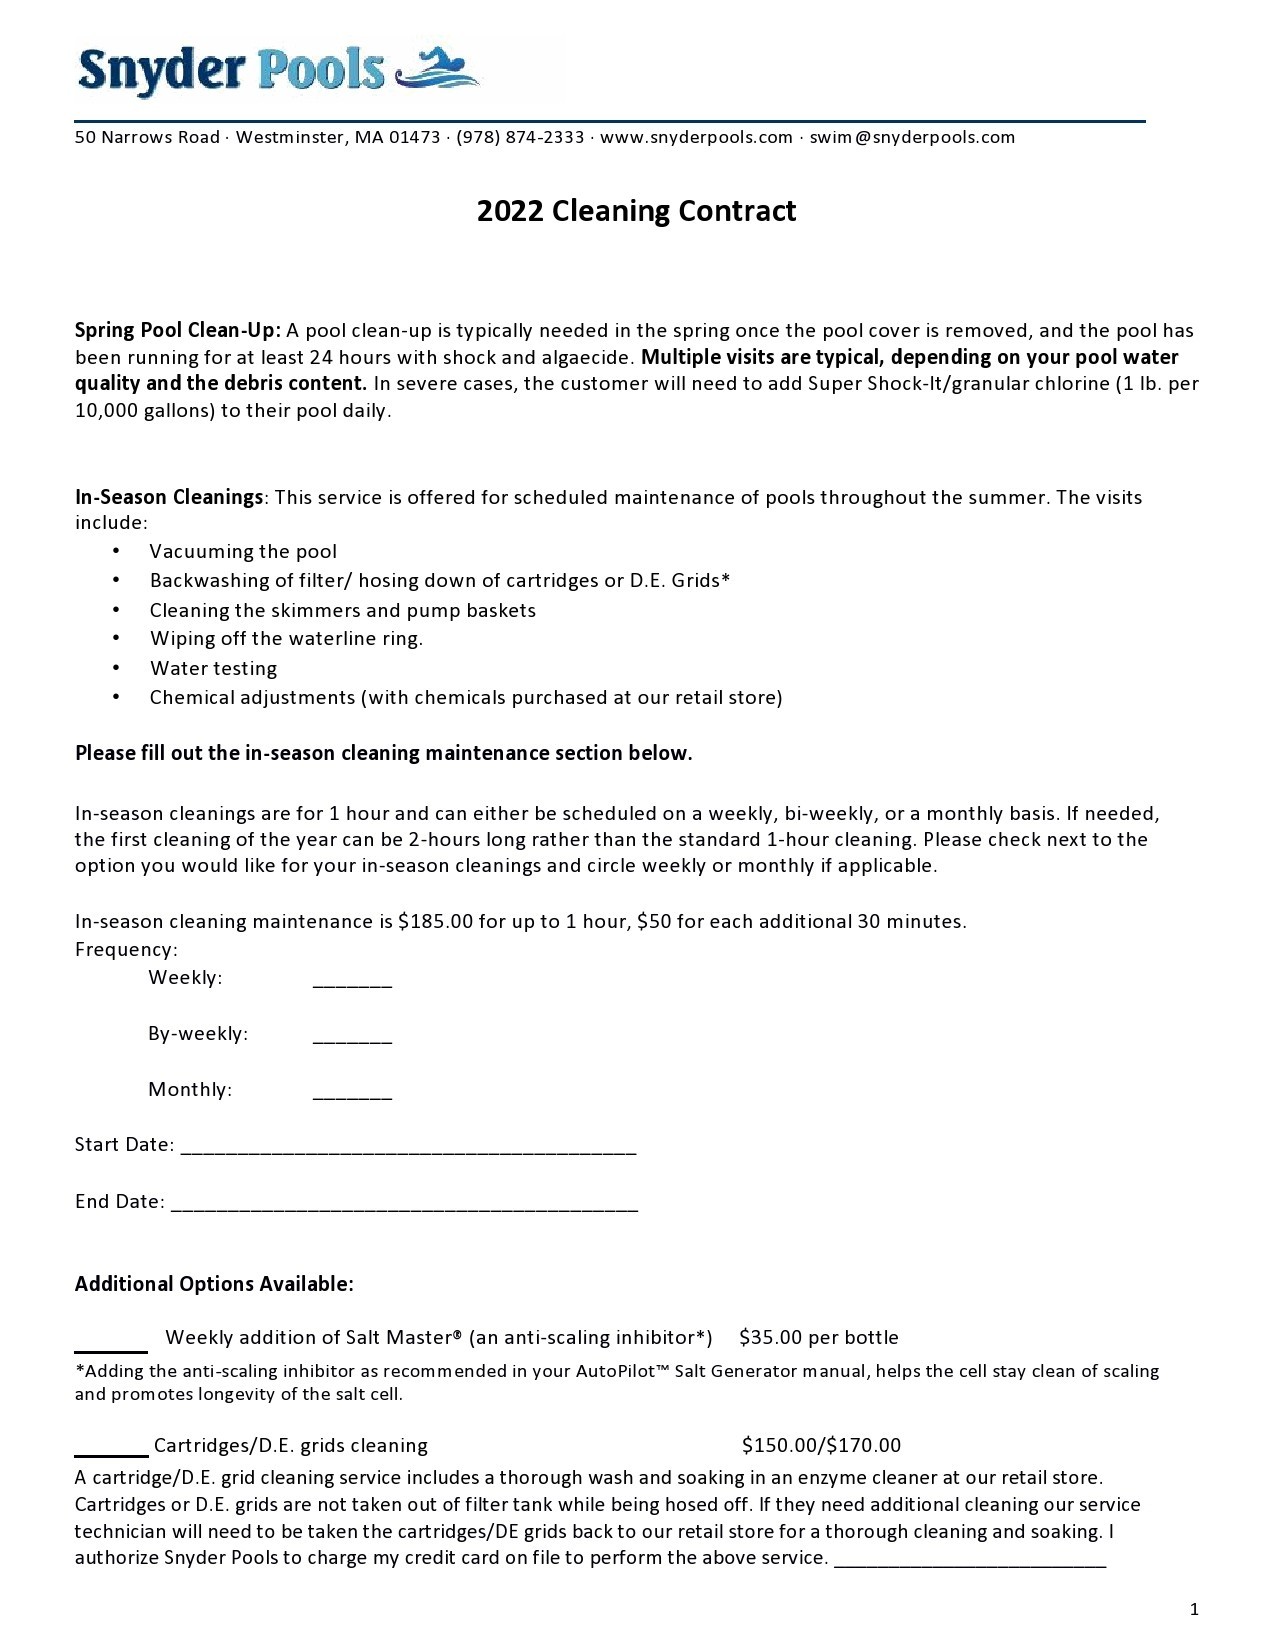 Free cleaning contract template 31